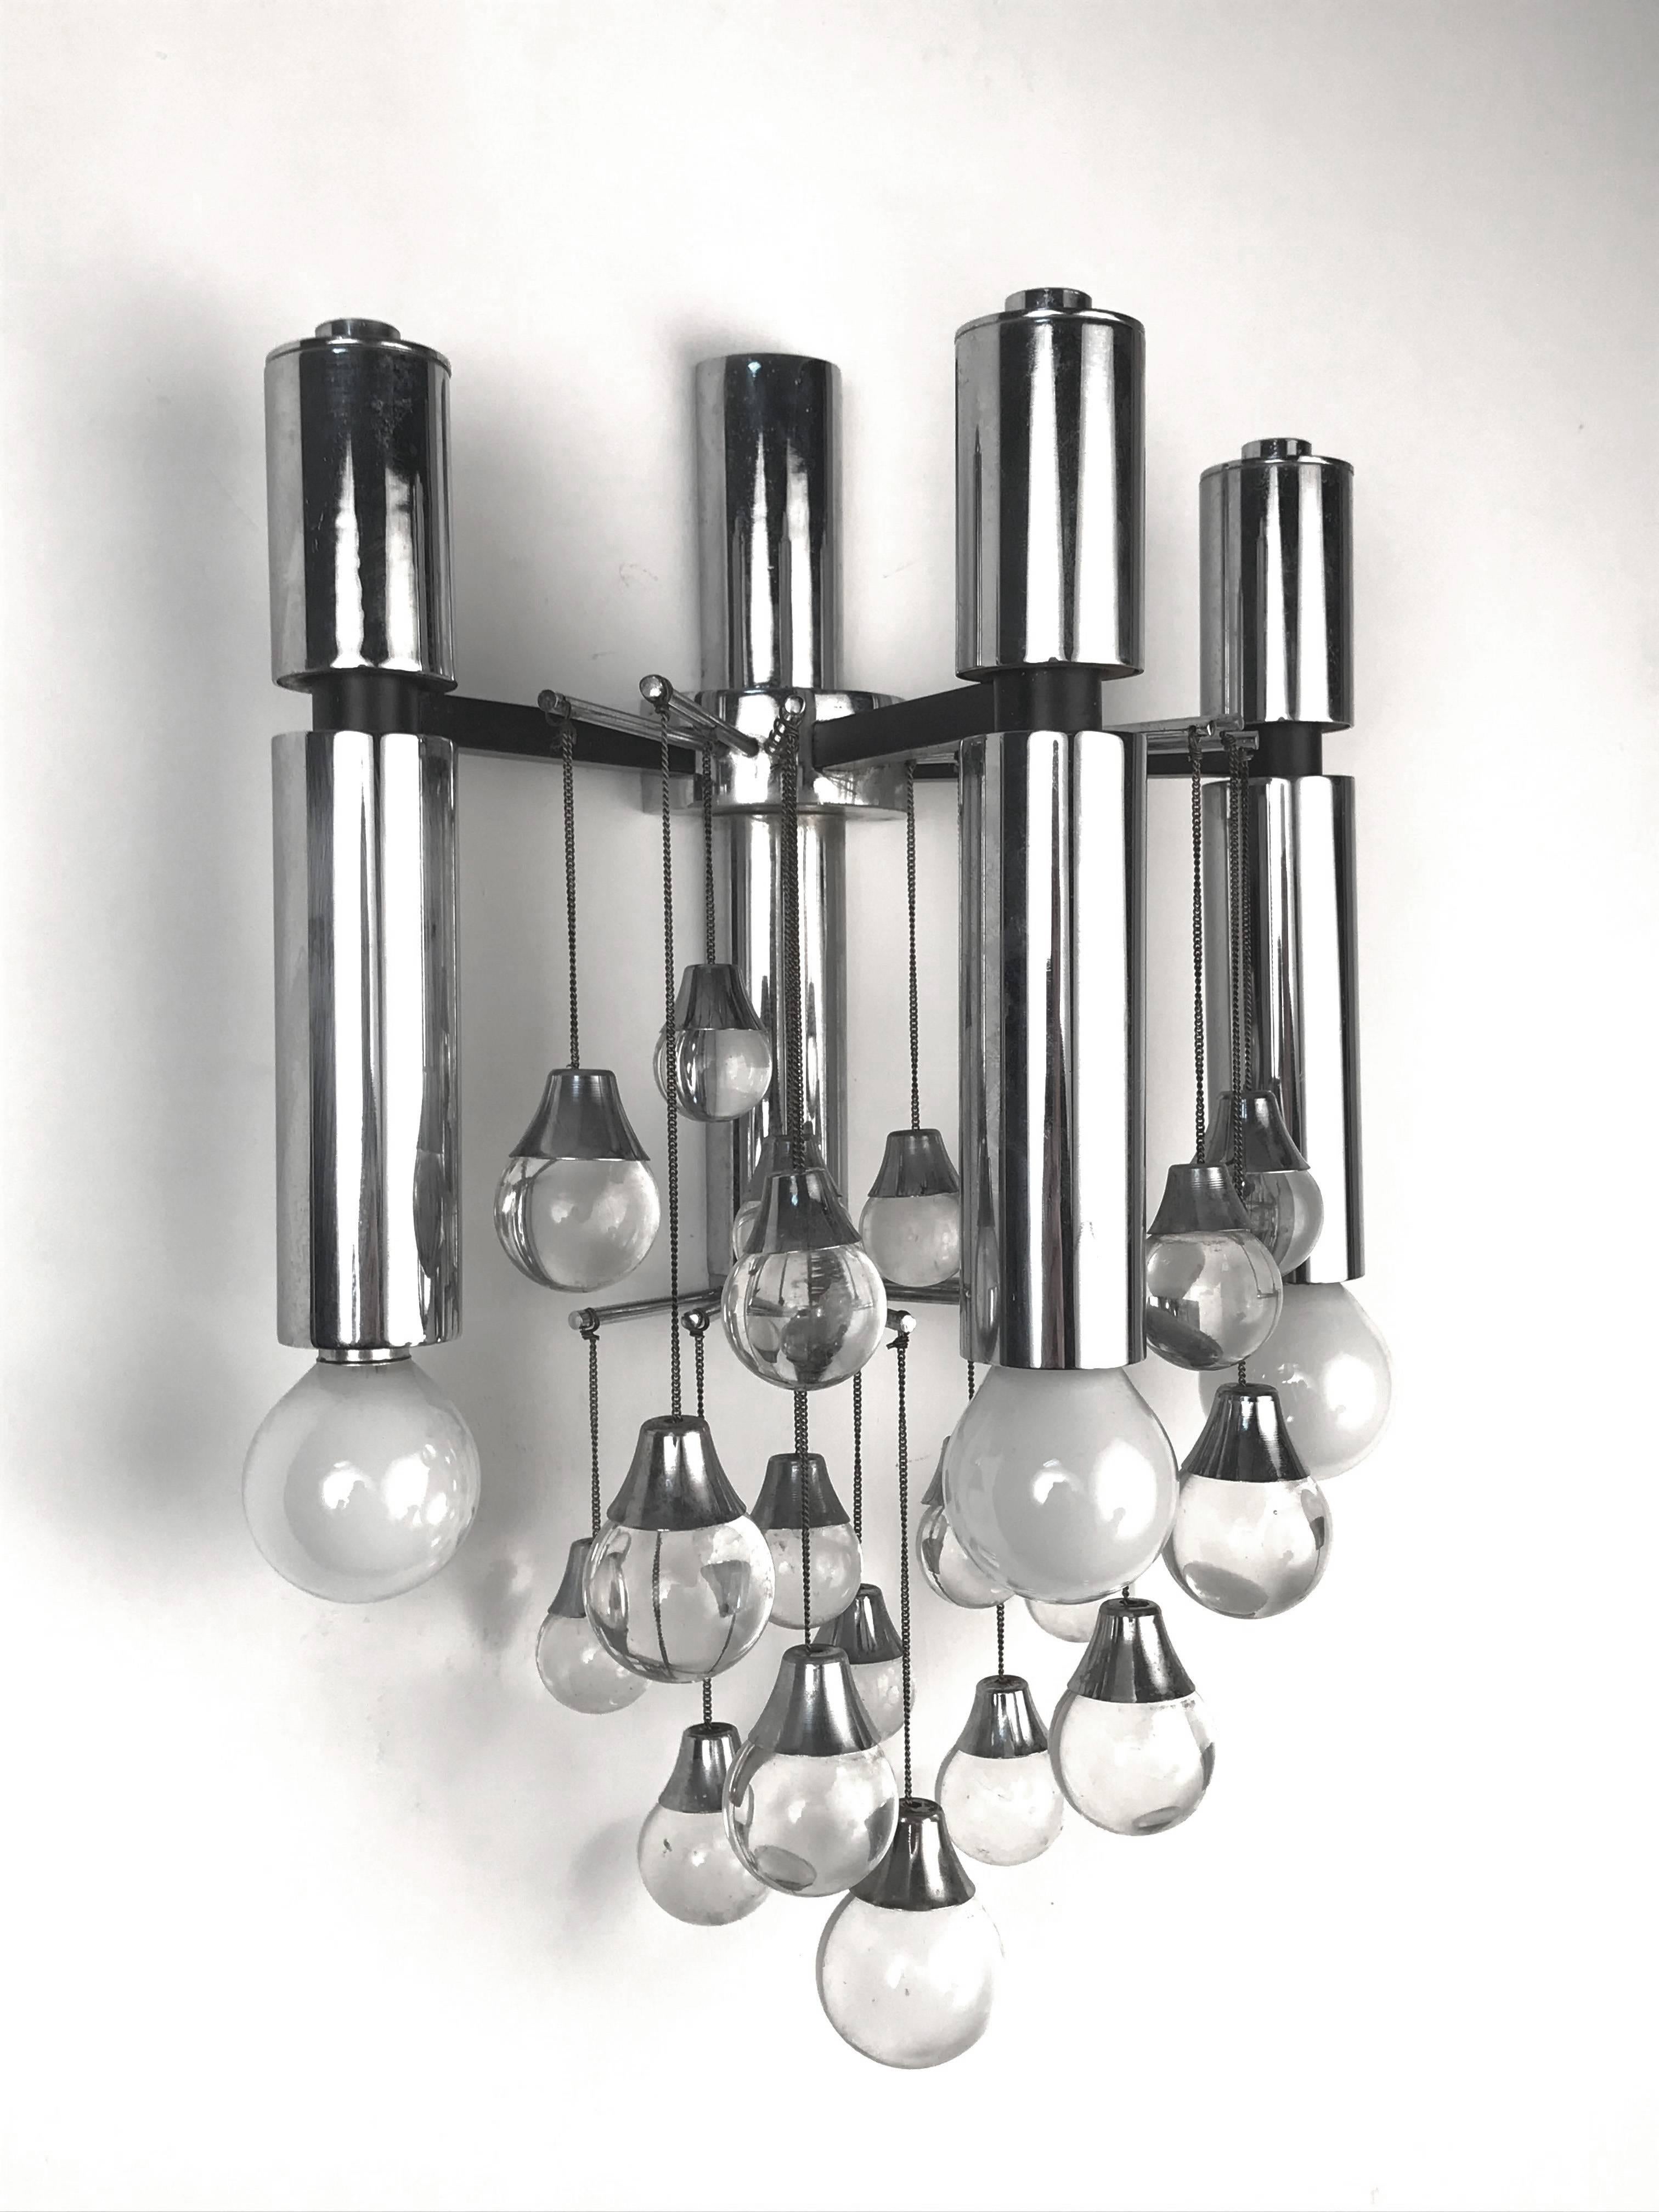 Pair of Sciolari Chrome and Glass Italian Sconces with Three Lights, 1960s For Sale 8